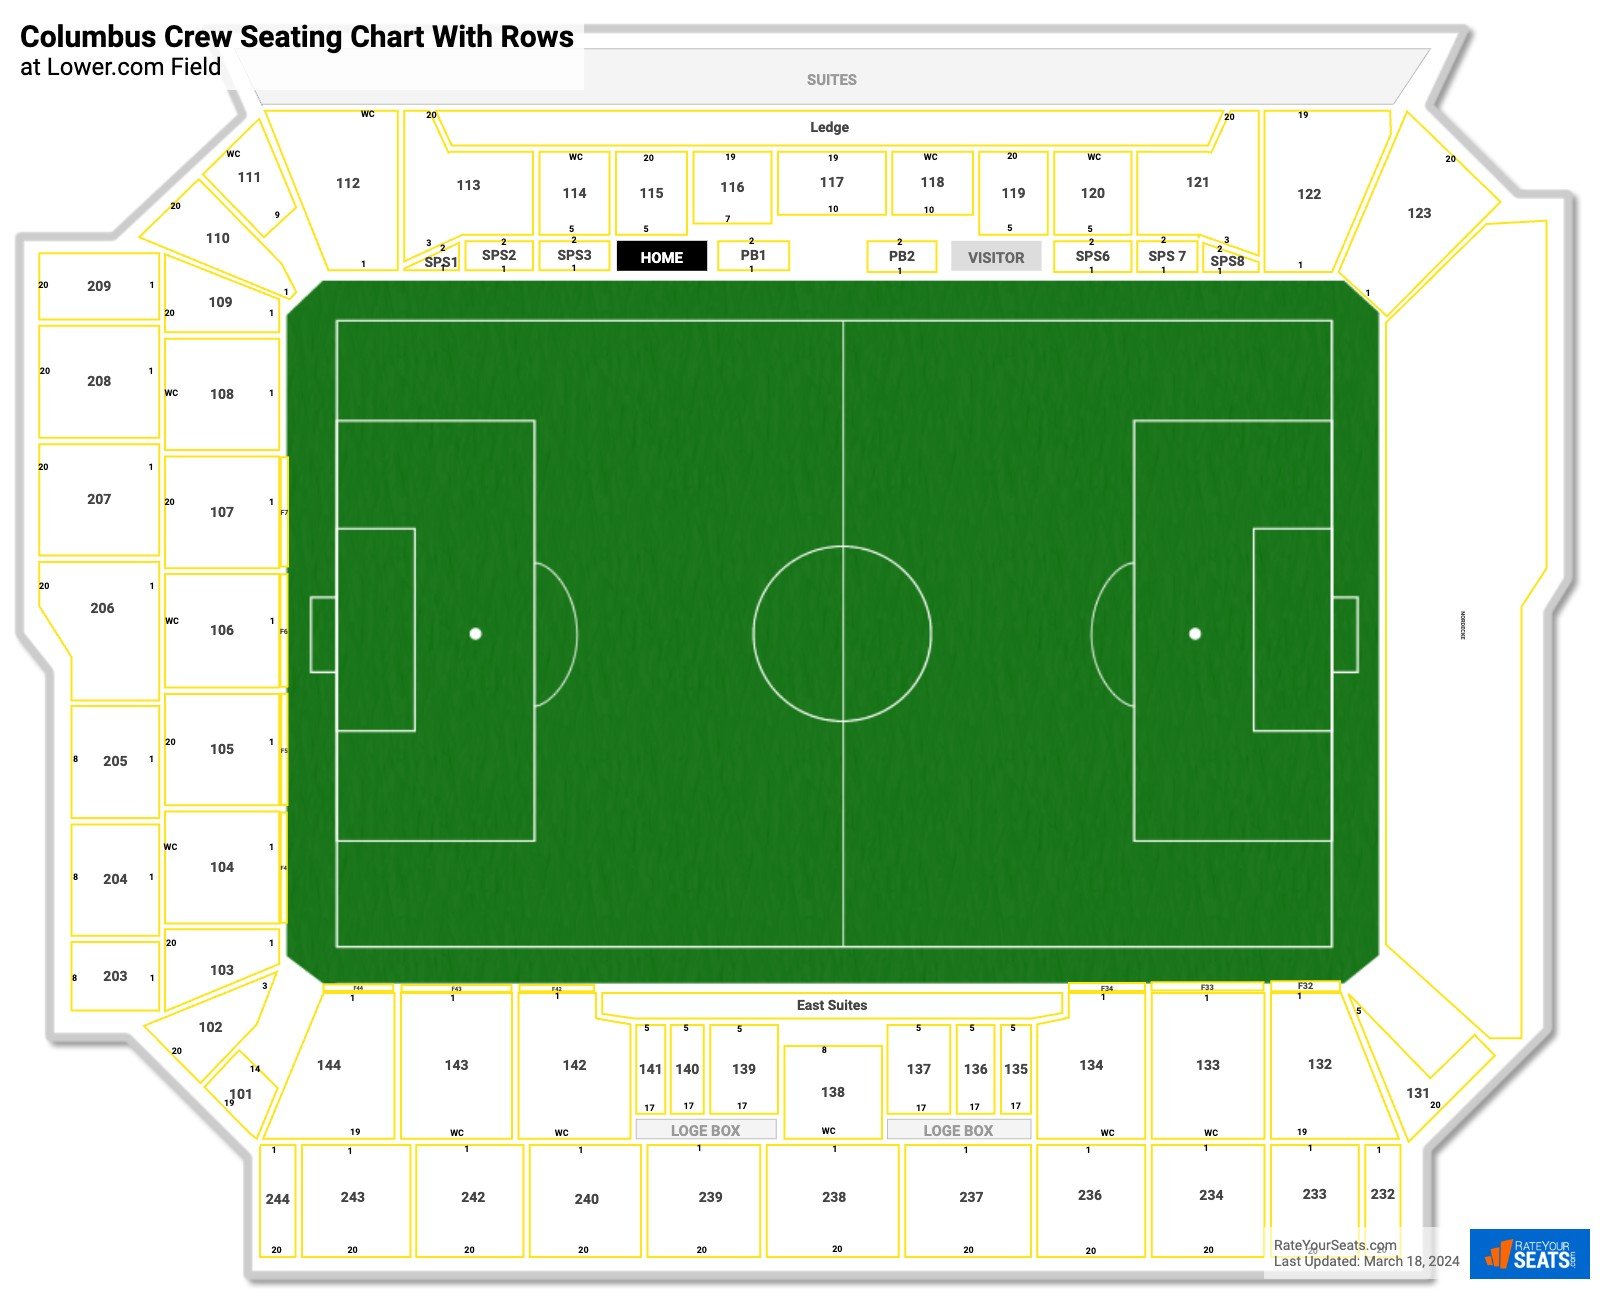 Lower.com Field seating chart with row numbers